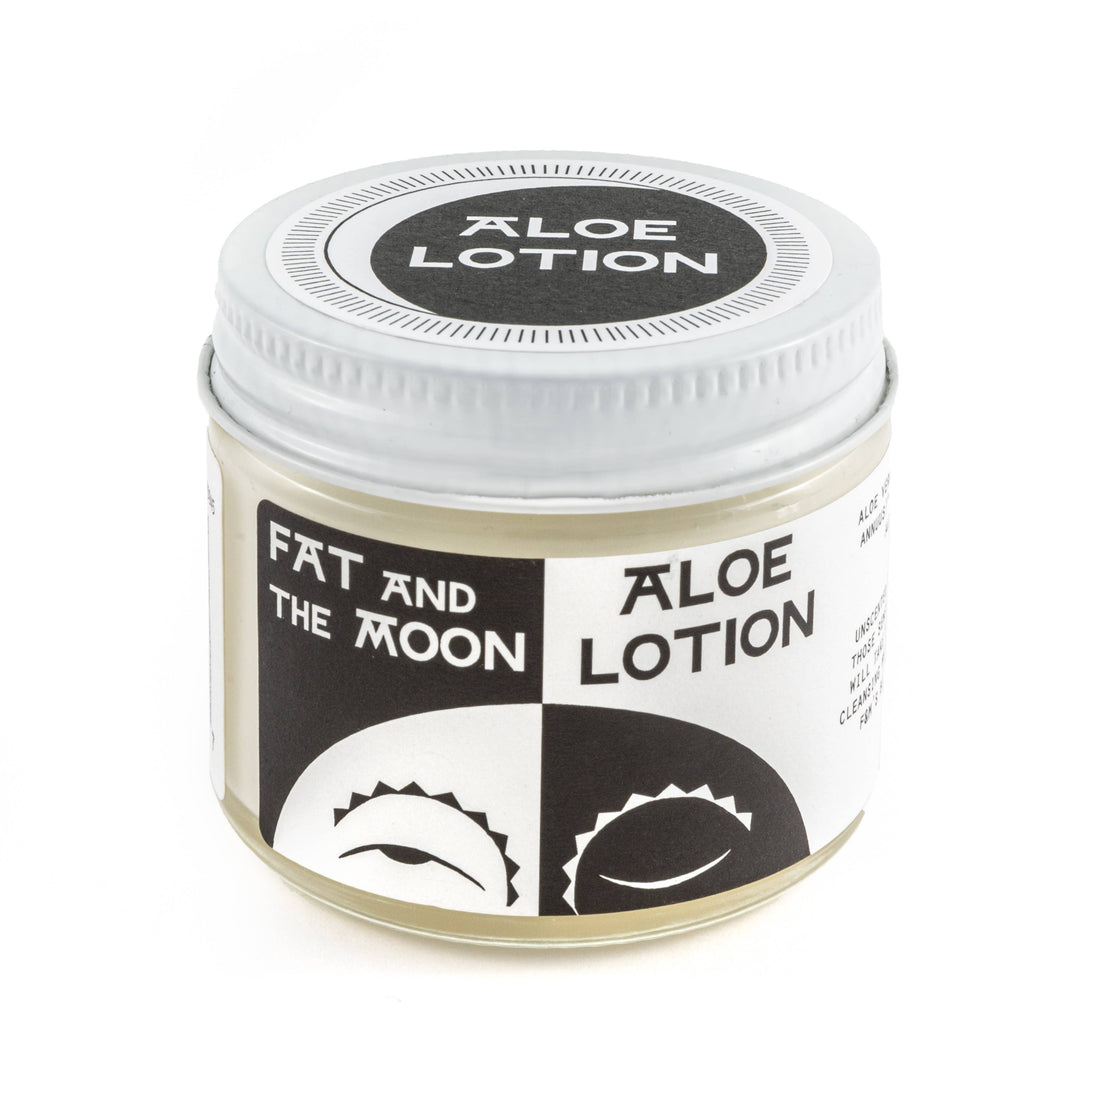 Fat and the Moon - 2 oz Aloe Lotion